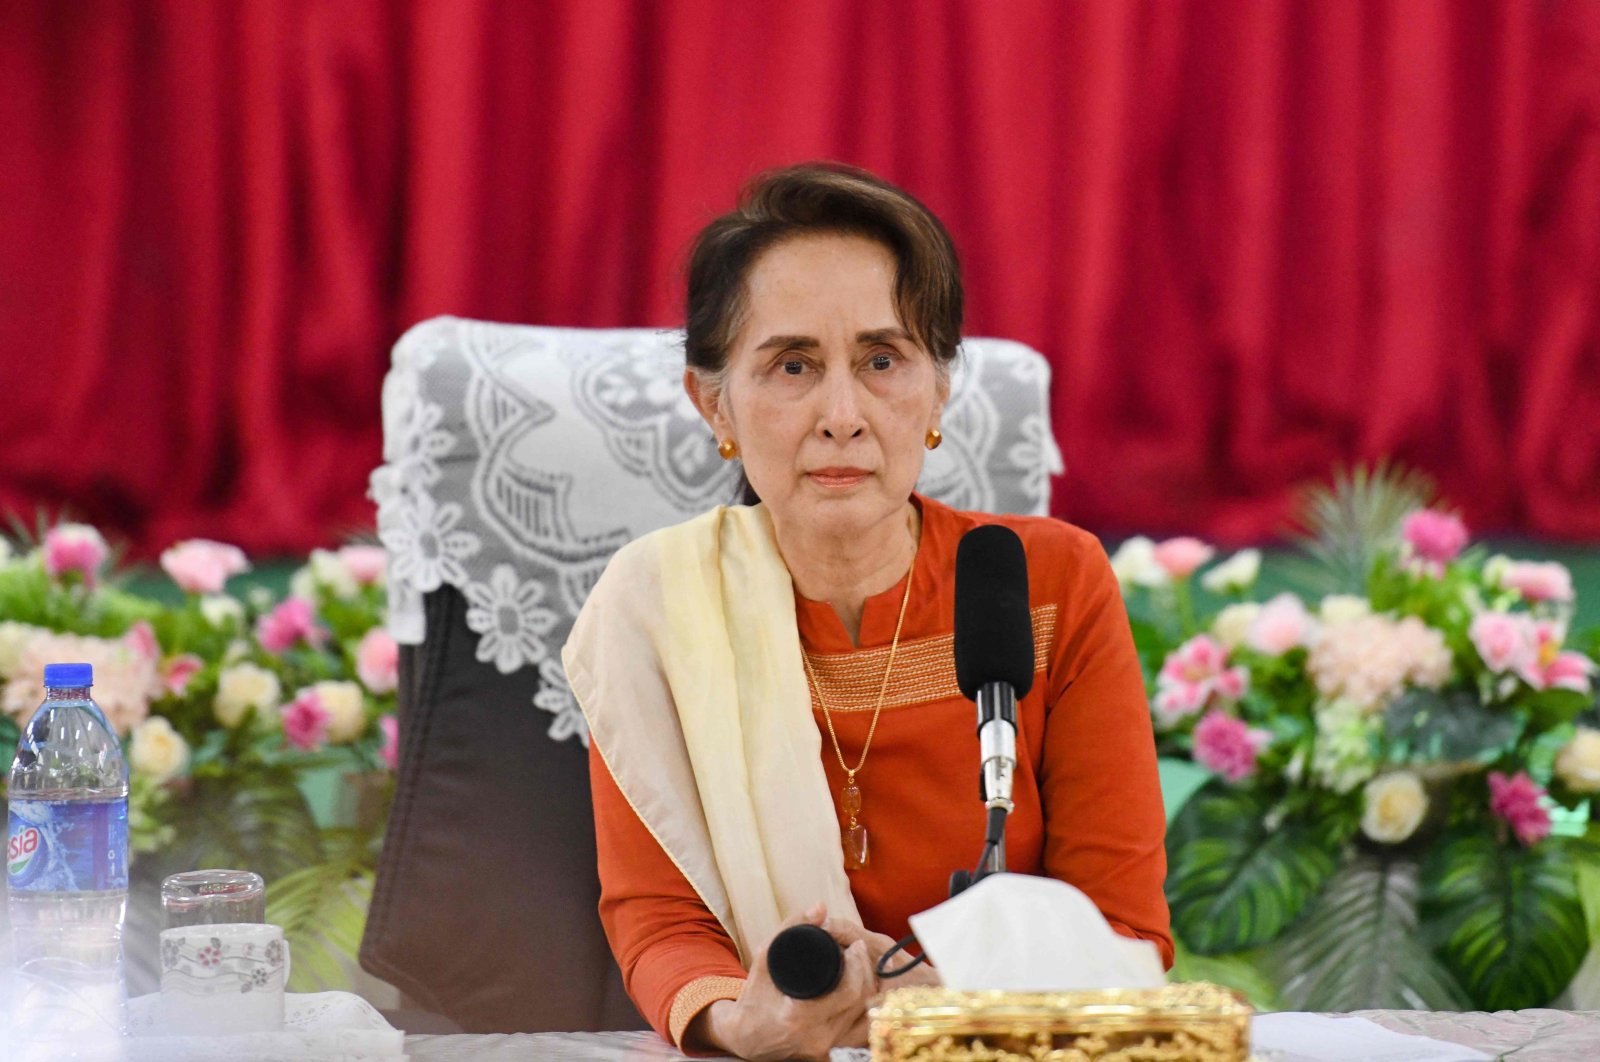 This file photo shows Myanmar State Counselor Aung San Suu Kyi listening to a question from local people during a visit to Thayarwaddy township, Bago Region, Myanmar, March 14, 2019. (AFP Photo)